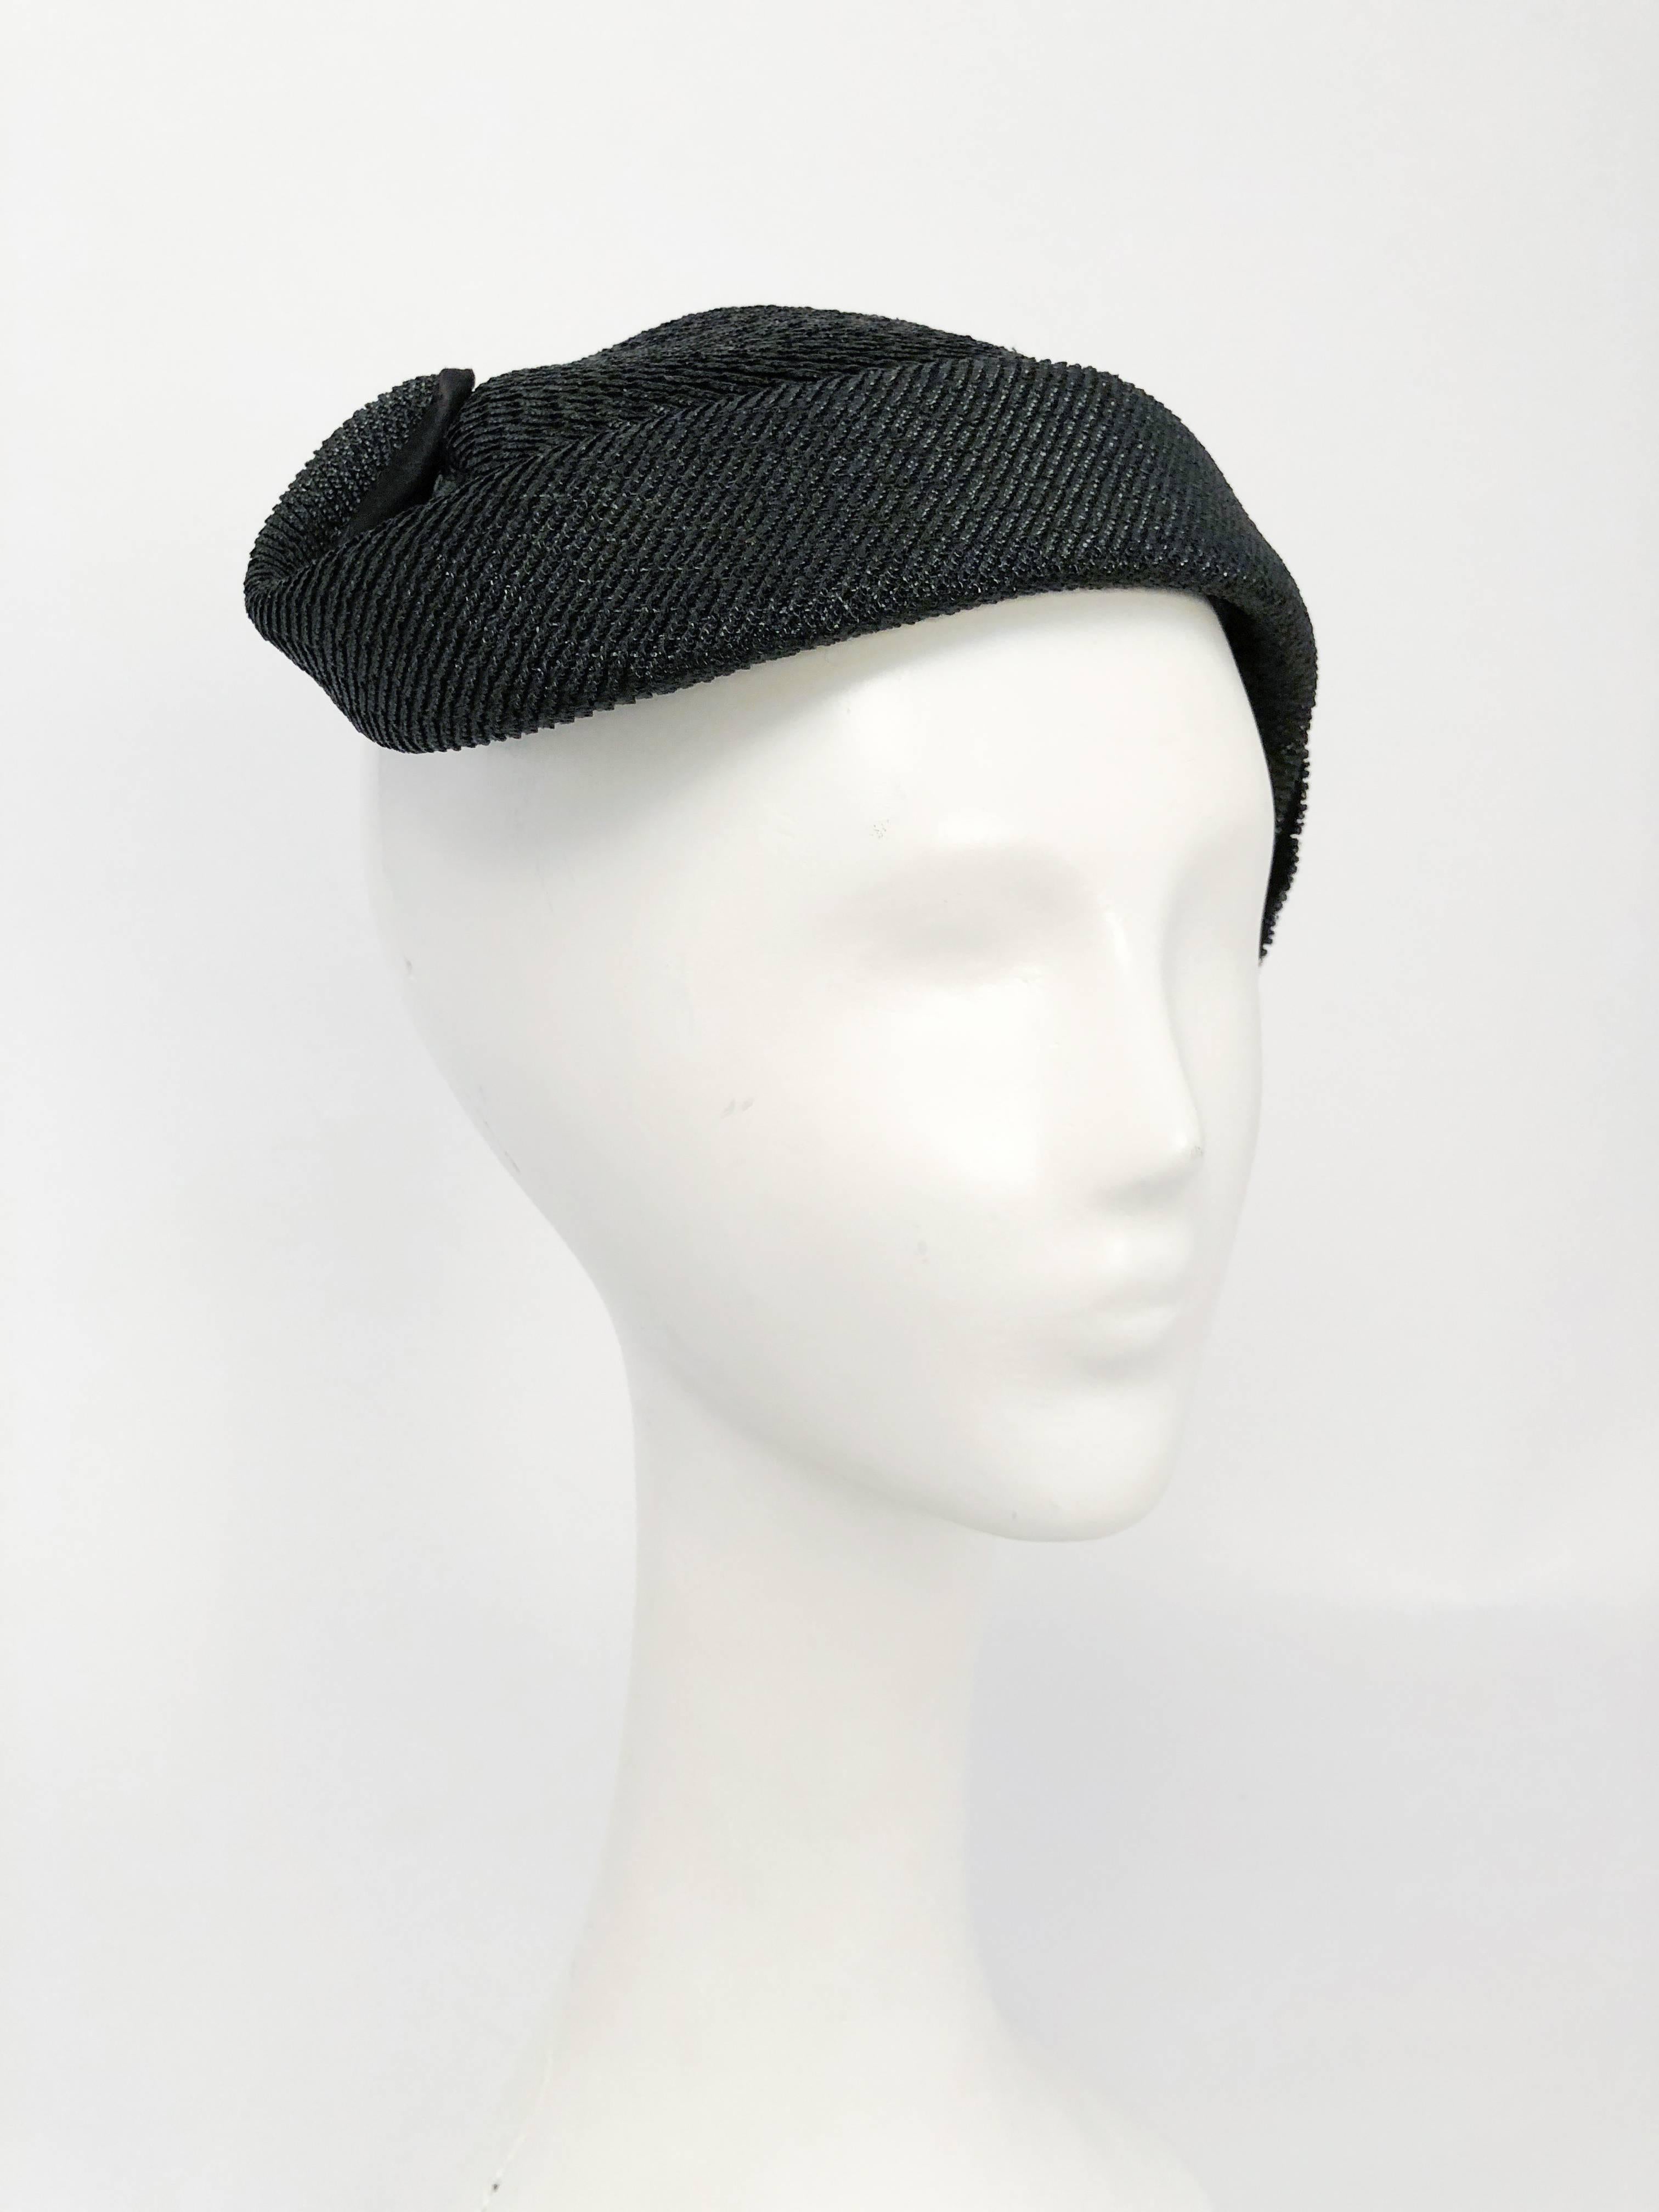 Women's 1950s Black Woven Straw Cocktail Hat with Beaded Leaf